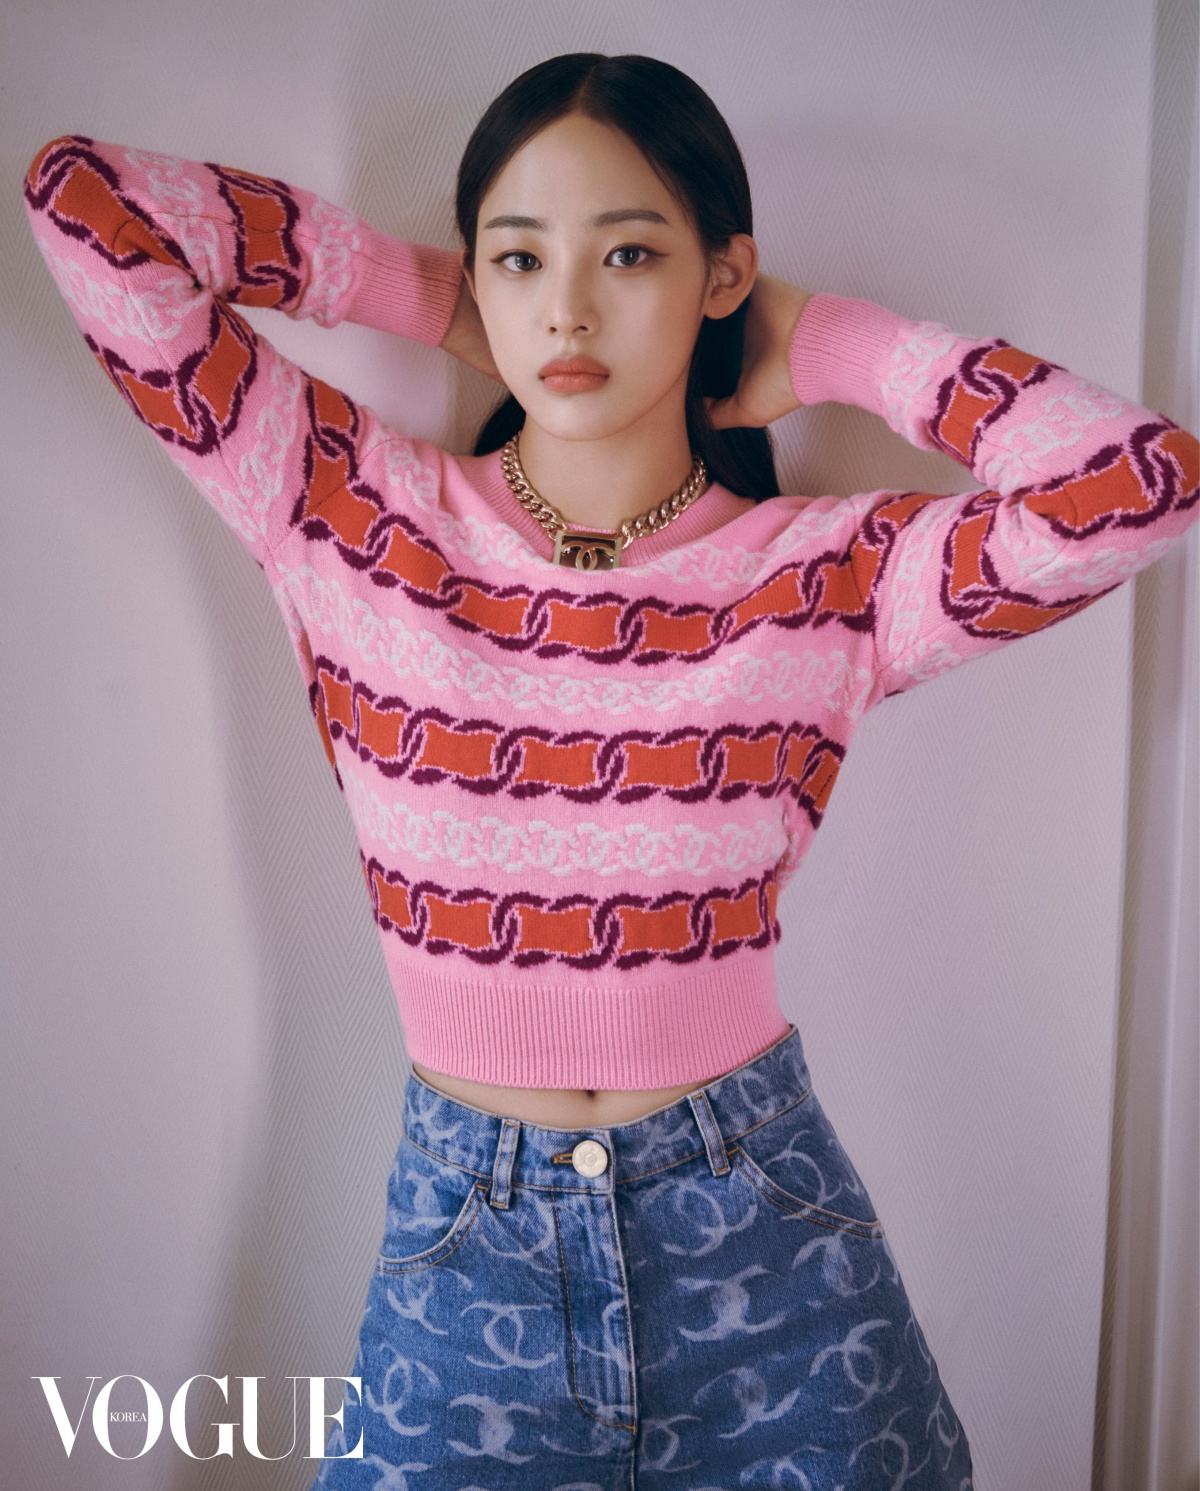 NewJeans Minji, The Second Coming of Olivia Hussey